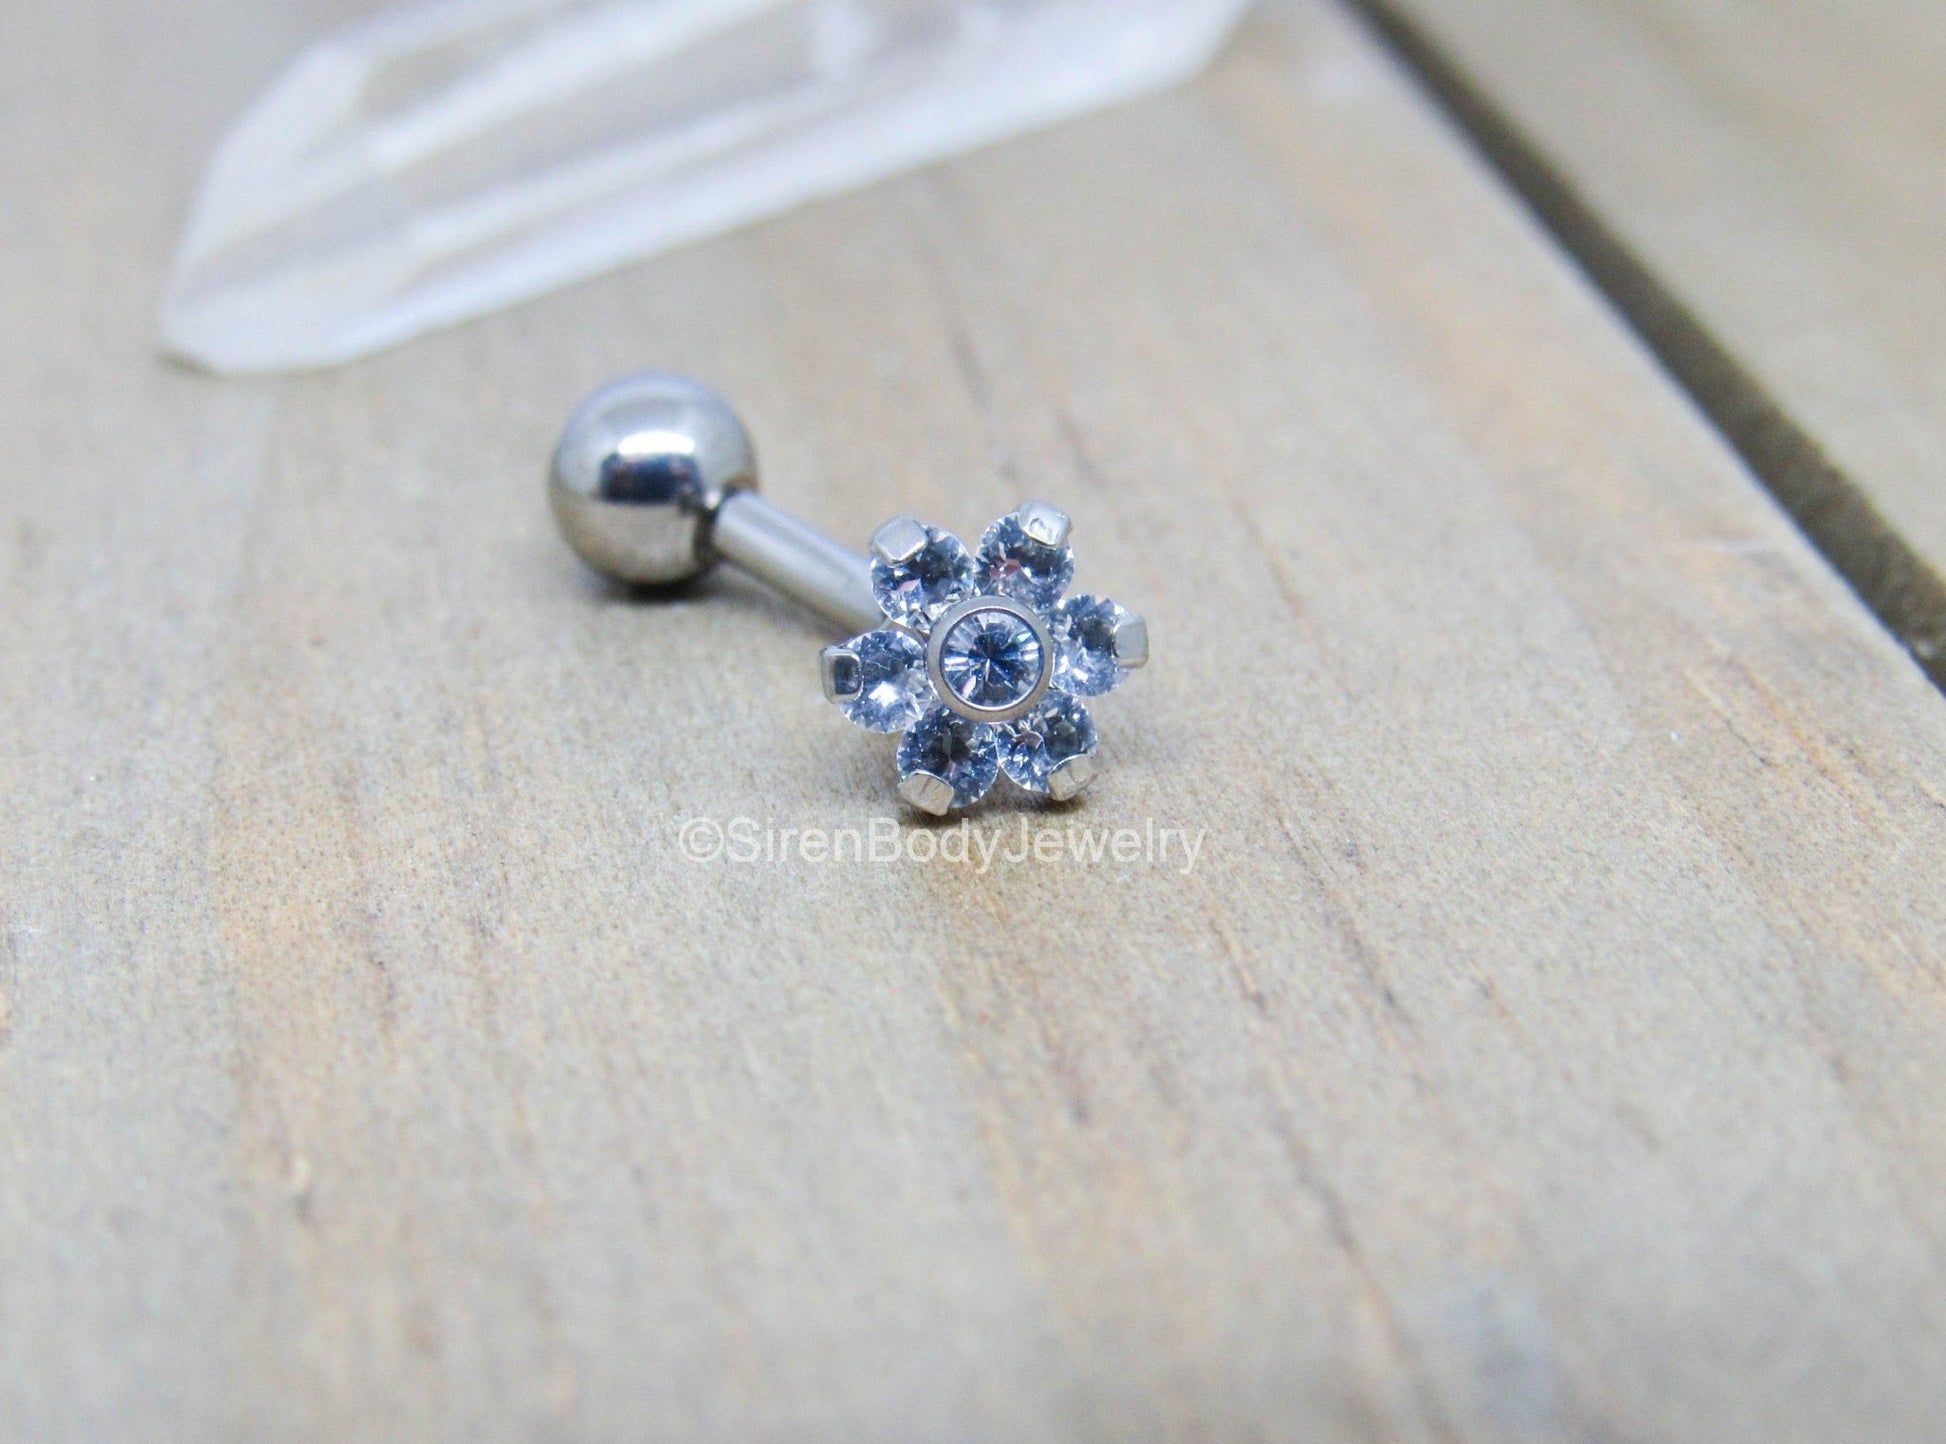 Flower floating navel jewelry 14g vch piercing curved barbell titanium hypoallergenic - SirenBodyJewelry